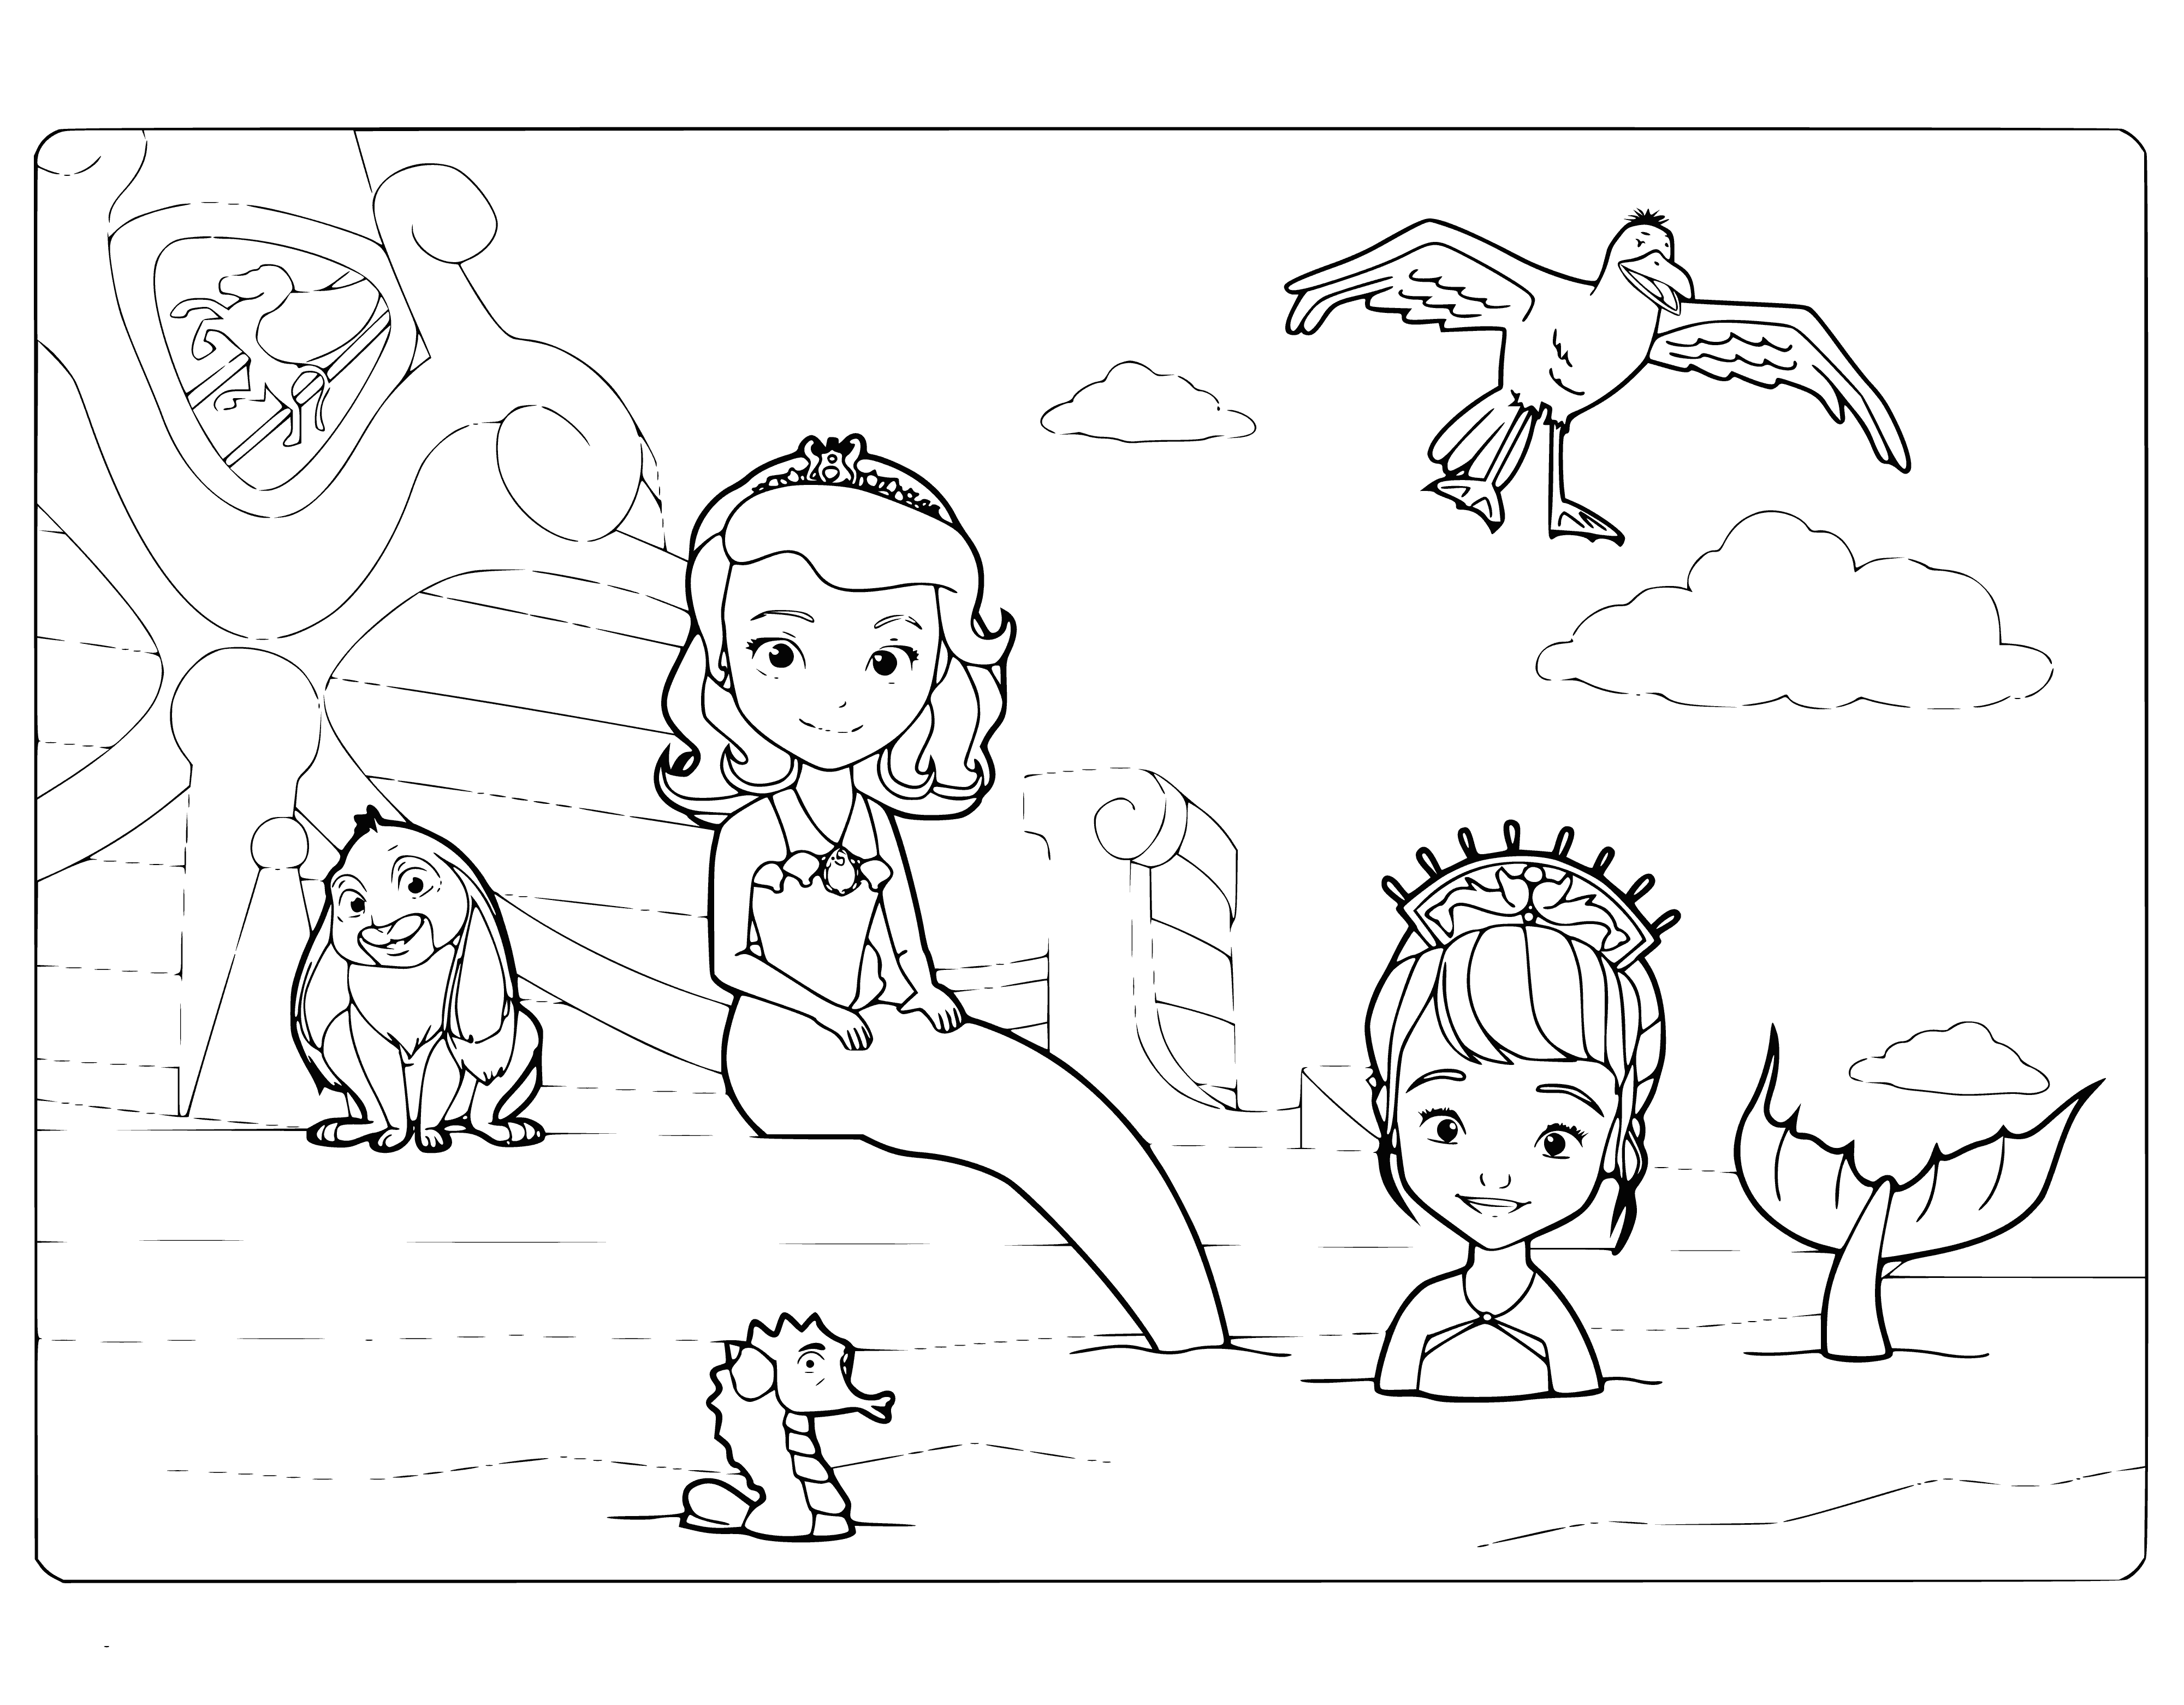 coloring page: Sofia (mermaid princess) & Una (regular mermaid) explore Sofia's underwater kingdom surrounded by green plants. Sofia has a pink crown and is holding a pink conch shell wearing purple & pink shells.